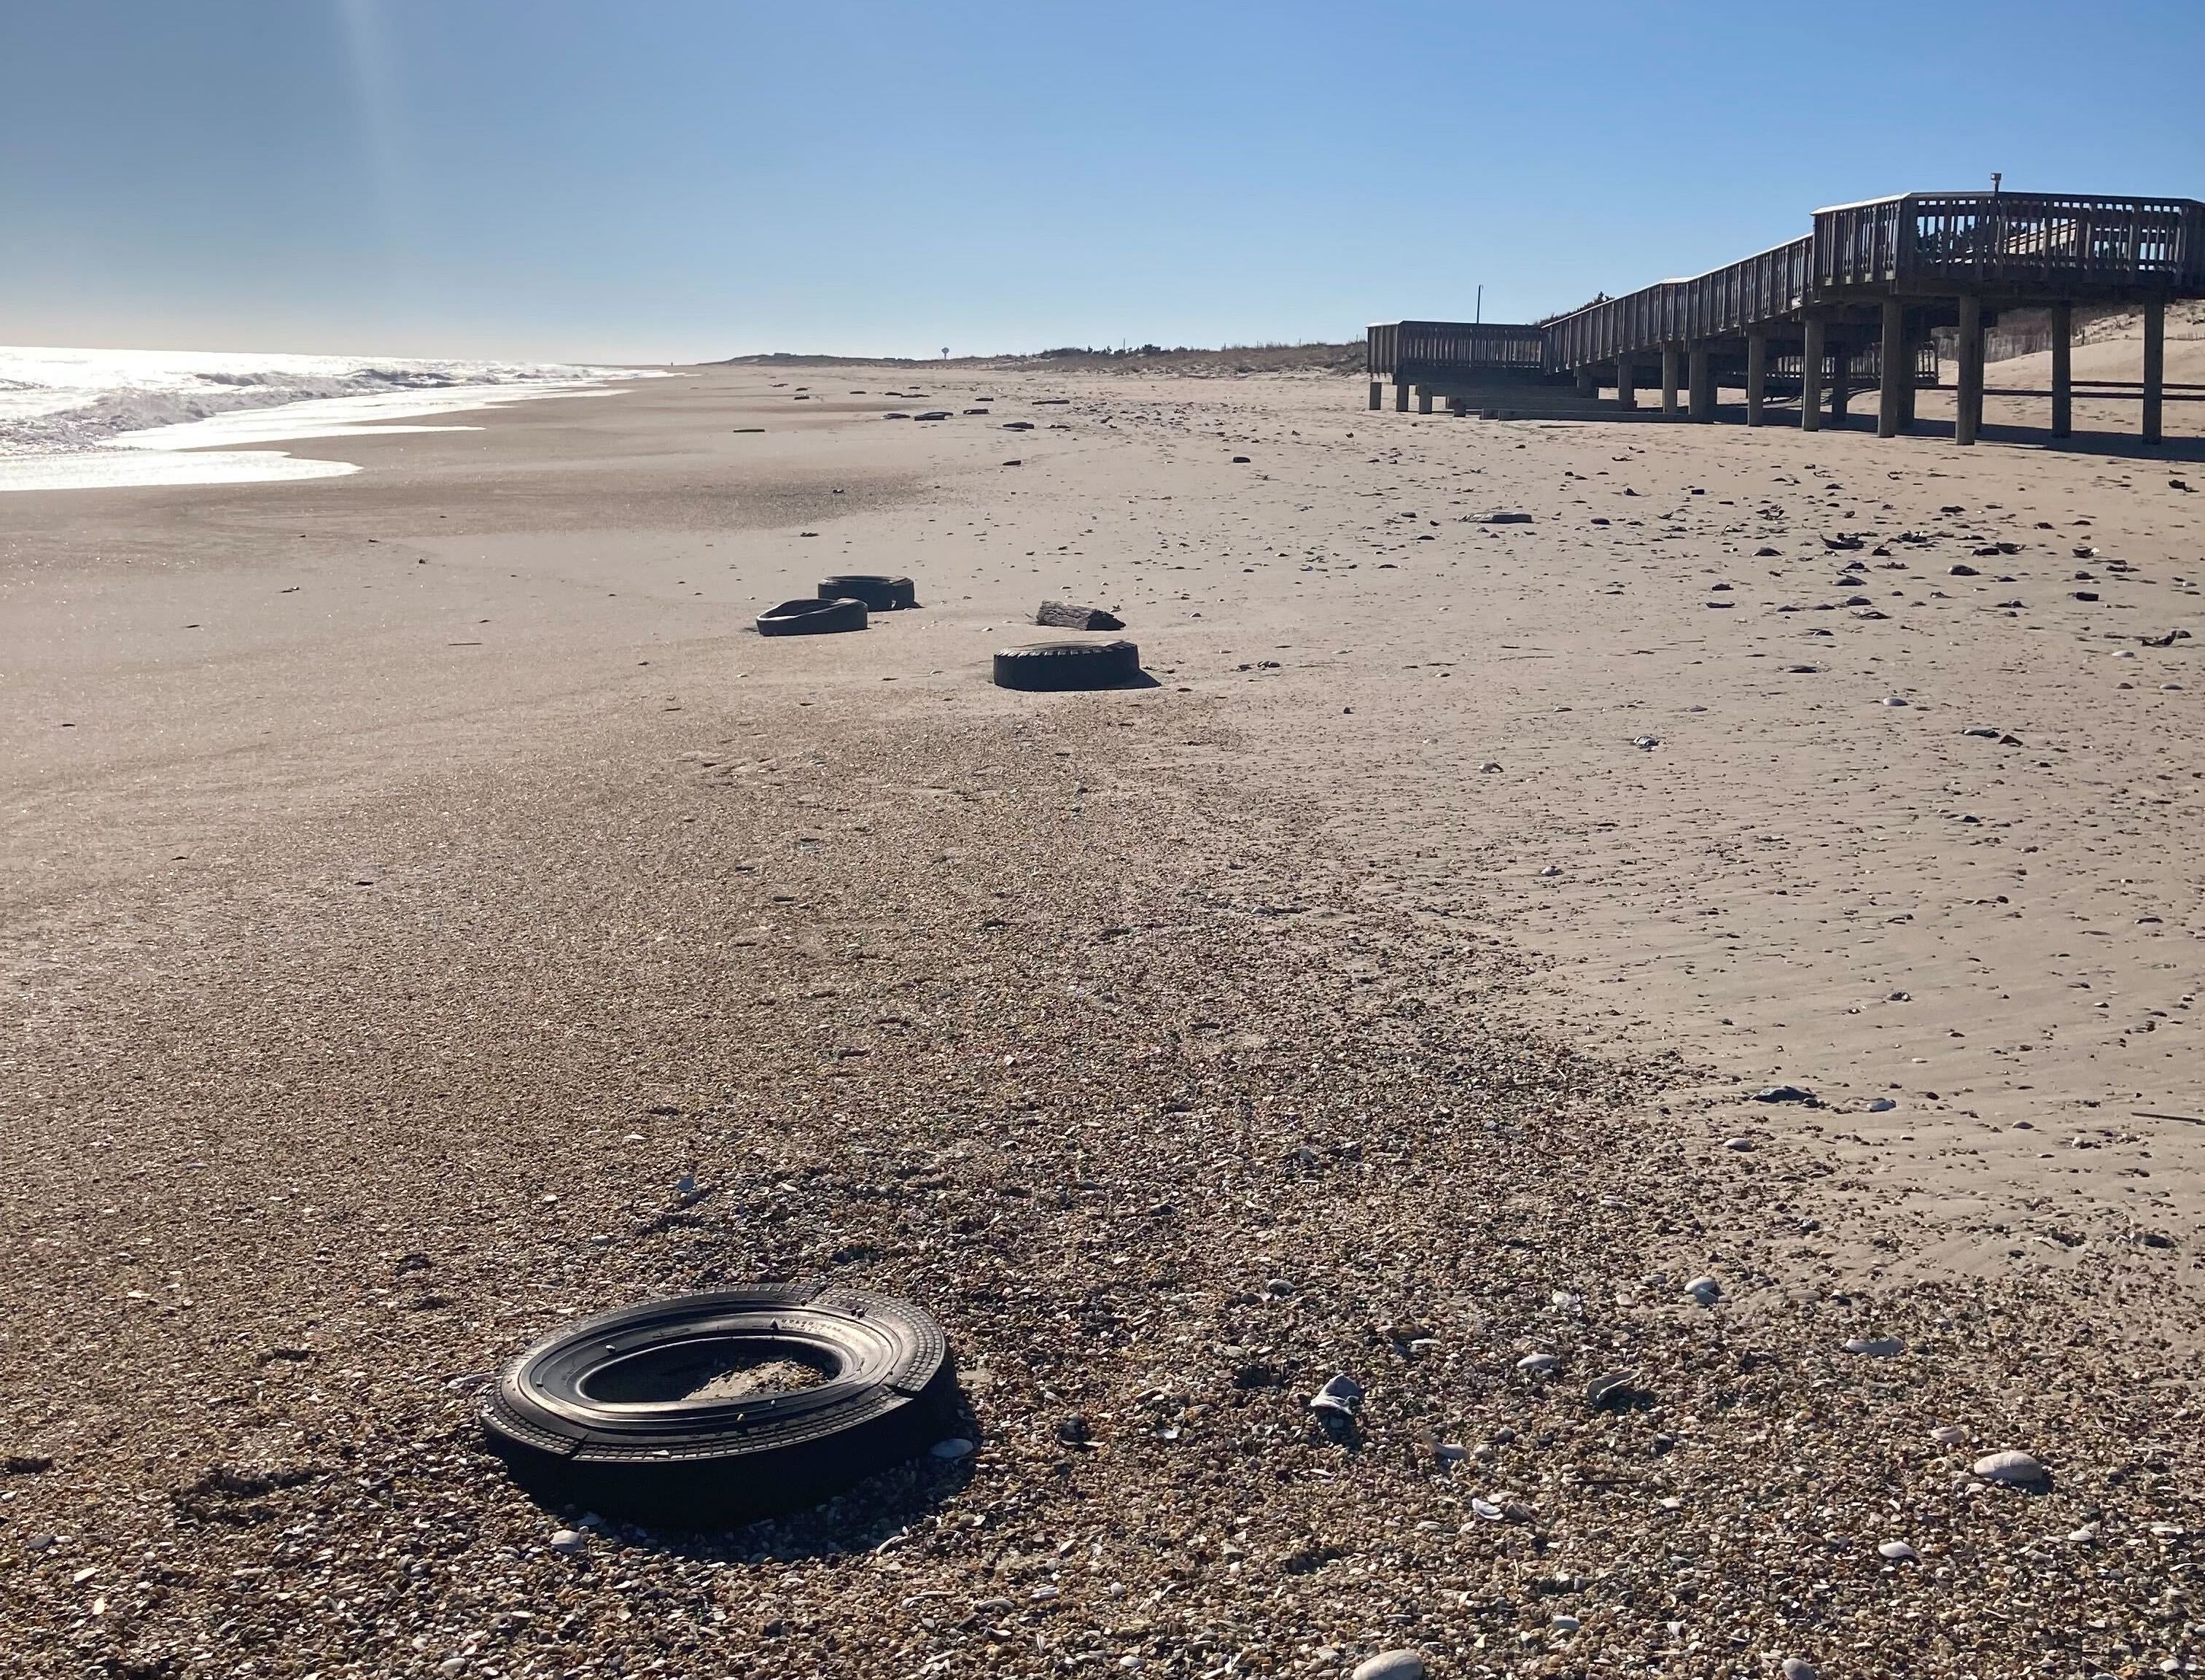 Delaware investigates where 100 tires washed ashore came from